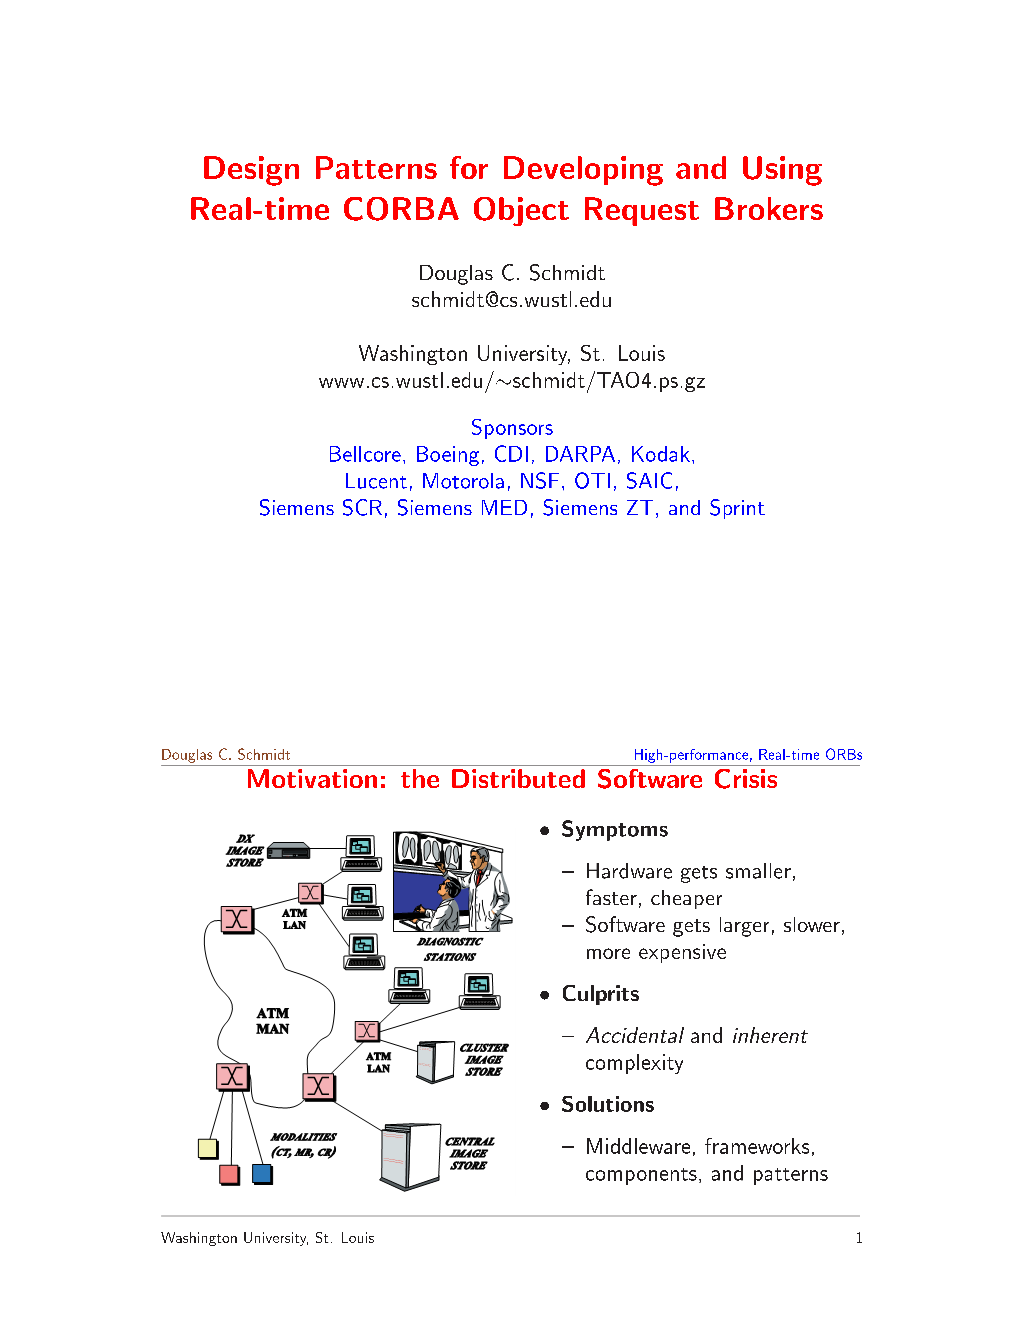 Design Patterns for Developing and Using Real-Time CORBA Object Request Brokers